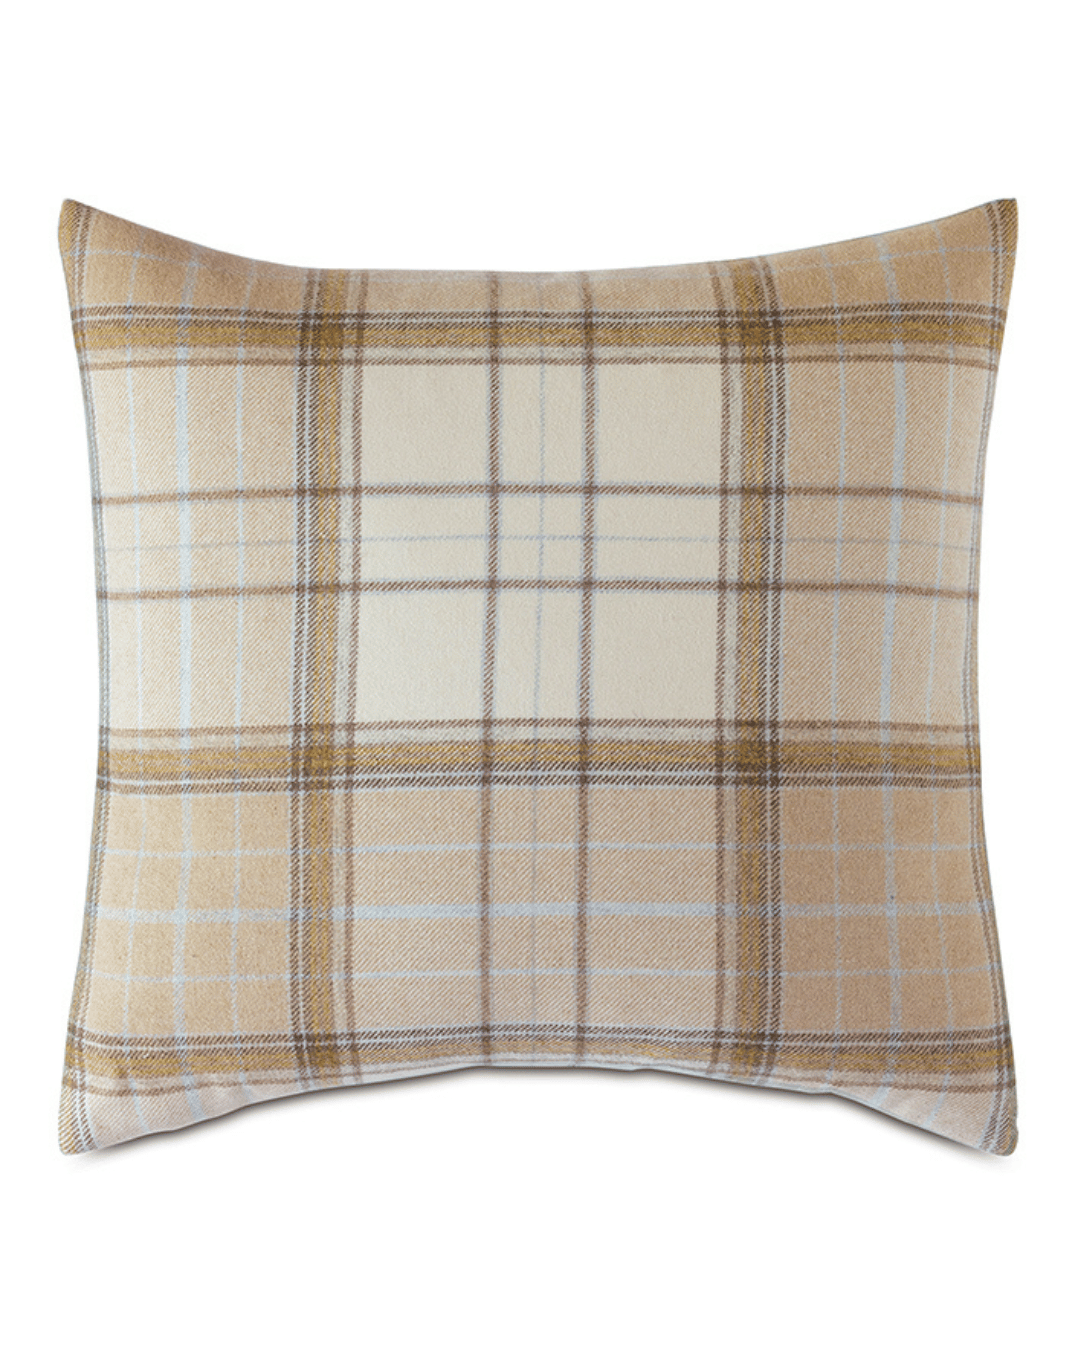 A rectangular throw pillow with a beige and soft brown plaid pattern, reminiscent of a Scottsdale Arizona bungalow, on a white background from Eastern Accents' RICH PLAID DECORATIVE PILLOW.